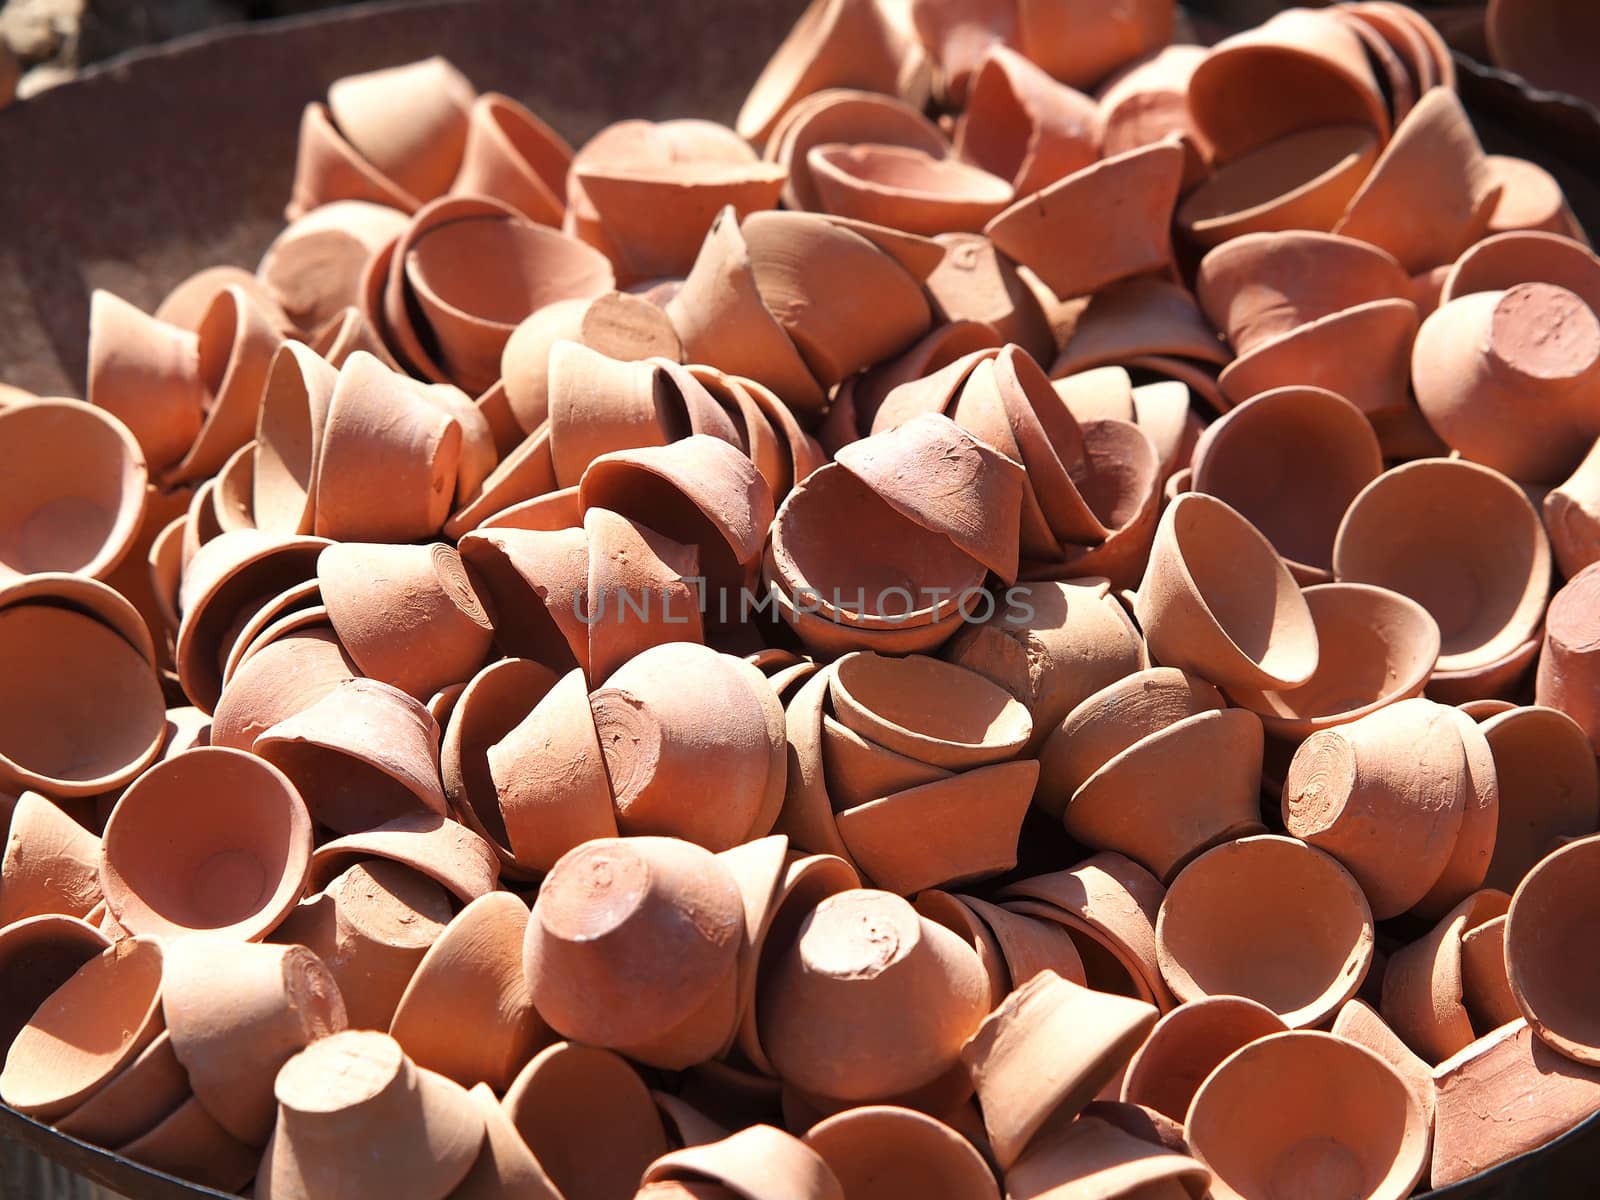 clay pots by nevenm